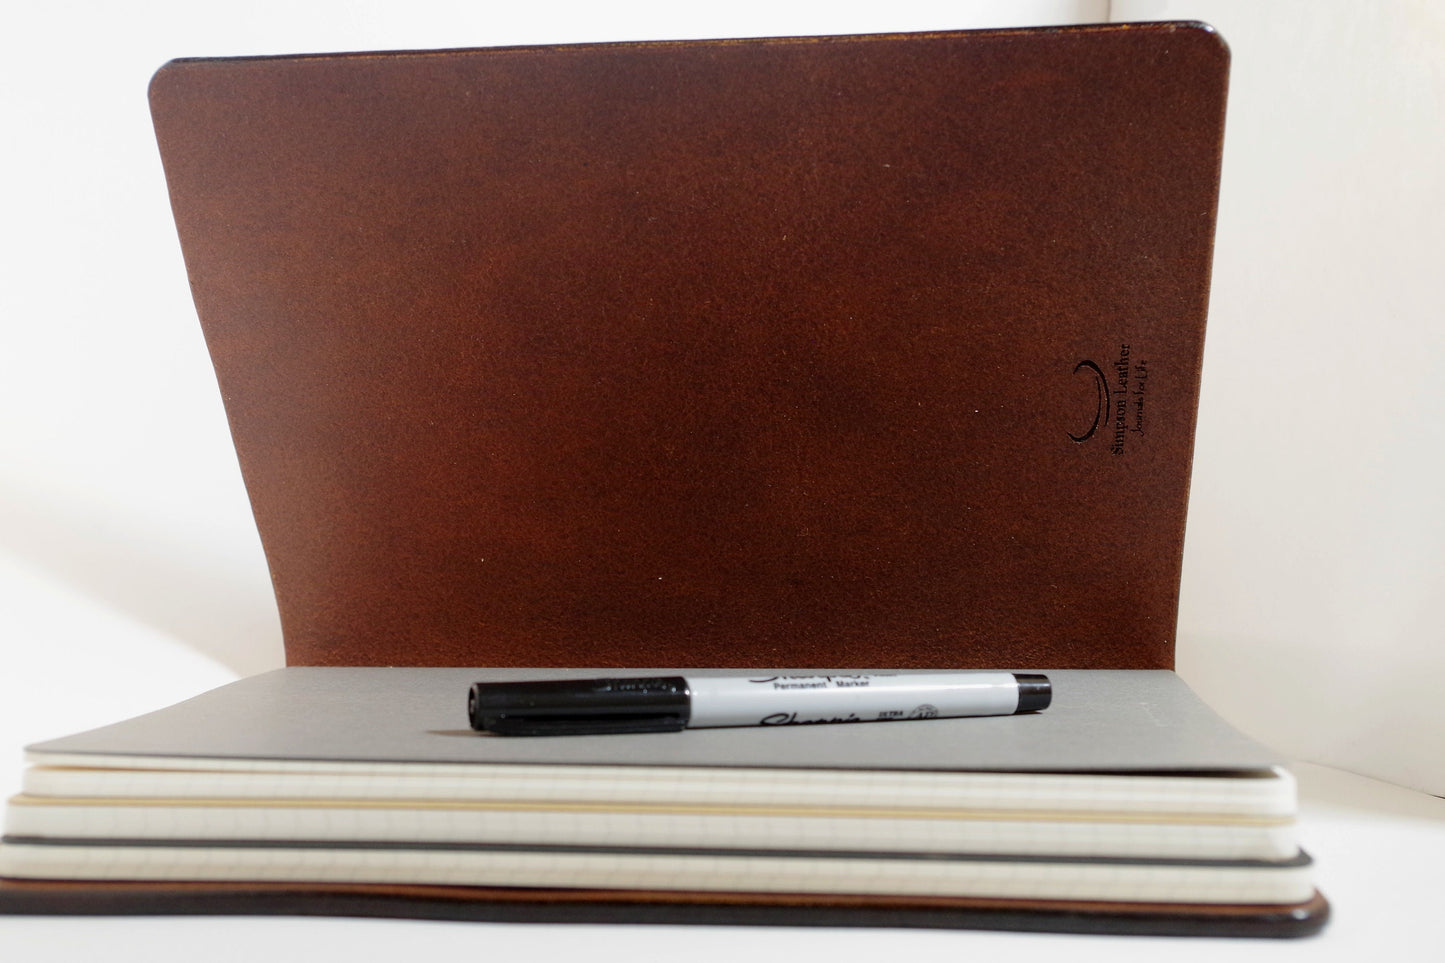 BIG Walnut Bridle Composition Cover | Full Grain Leather Journal | Fits 7.5" × 9.75" inserts